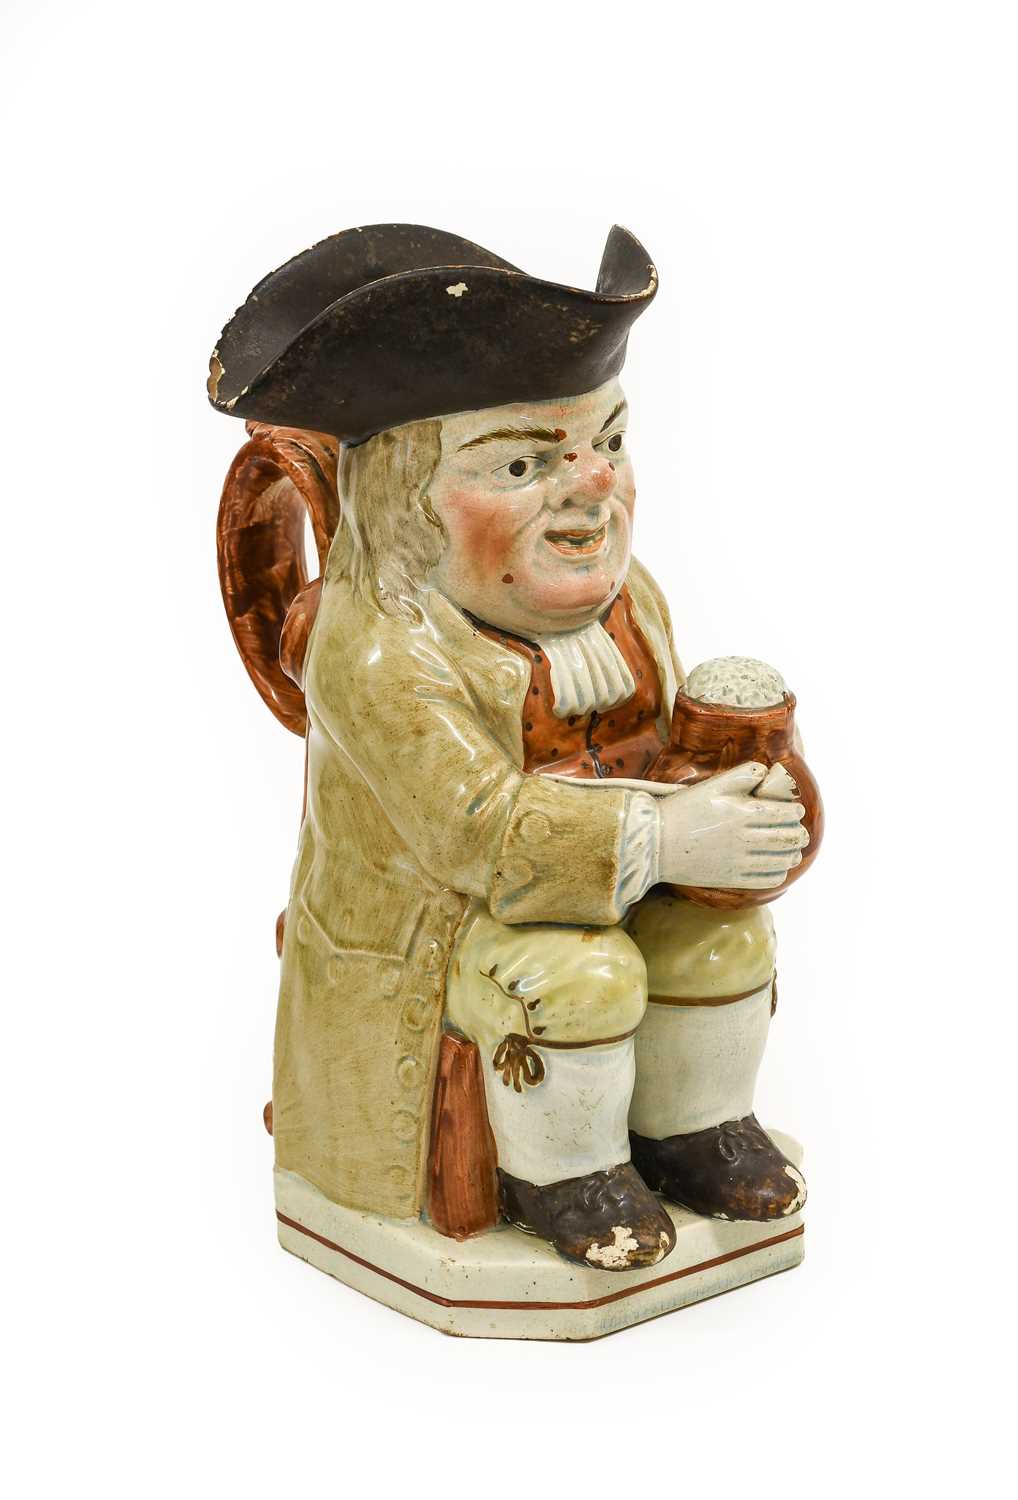 A Ralph Wood-Type Pearlware Toby Jug, circa 1800, of traditional form, the seated figure holding a - Image 6 of 6